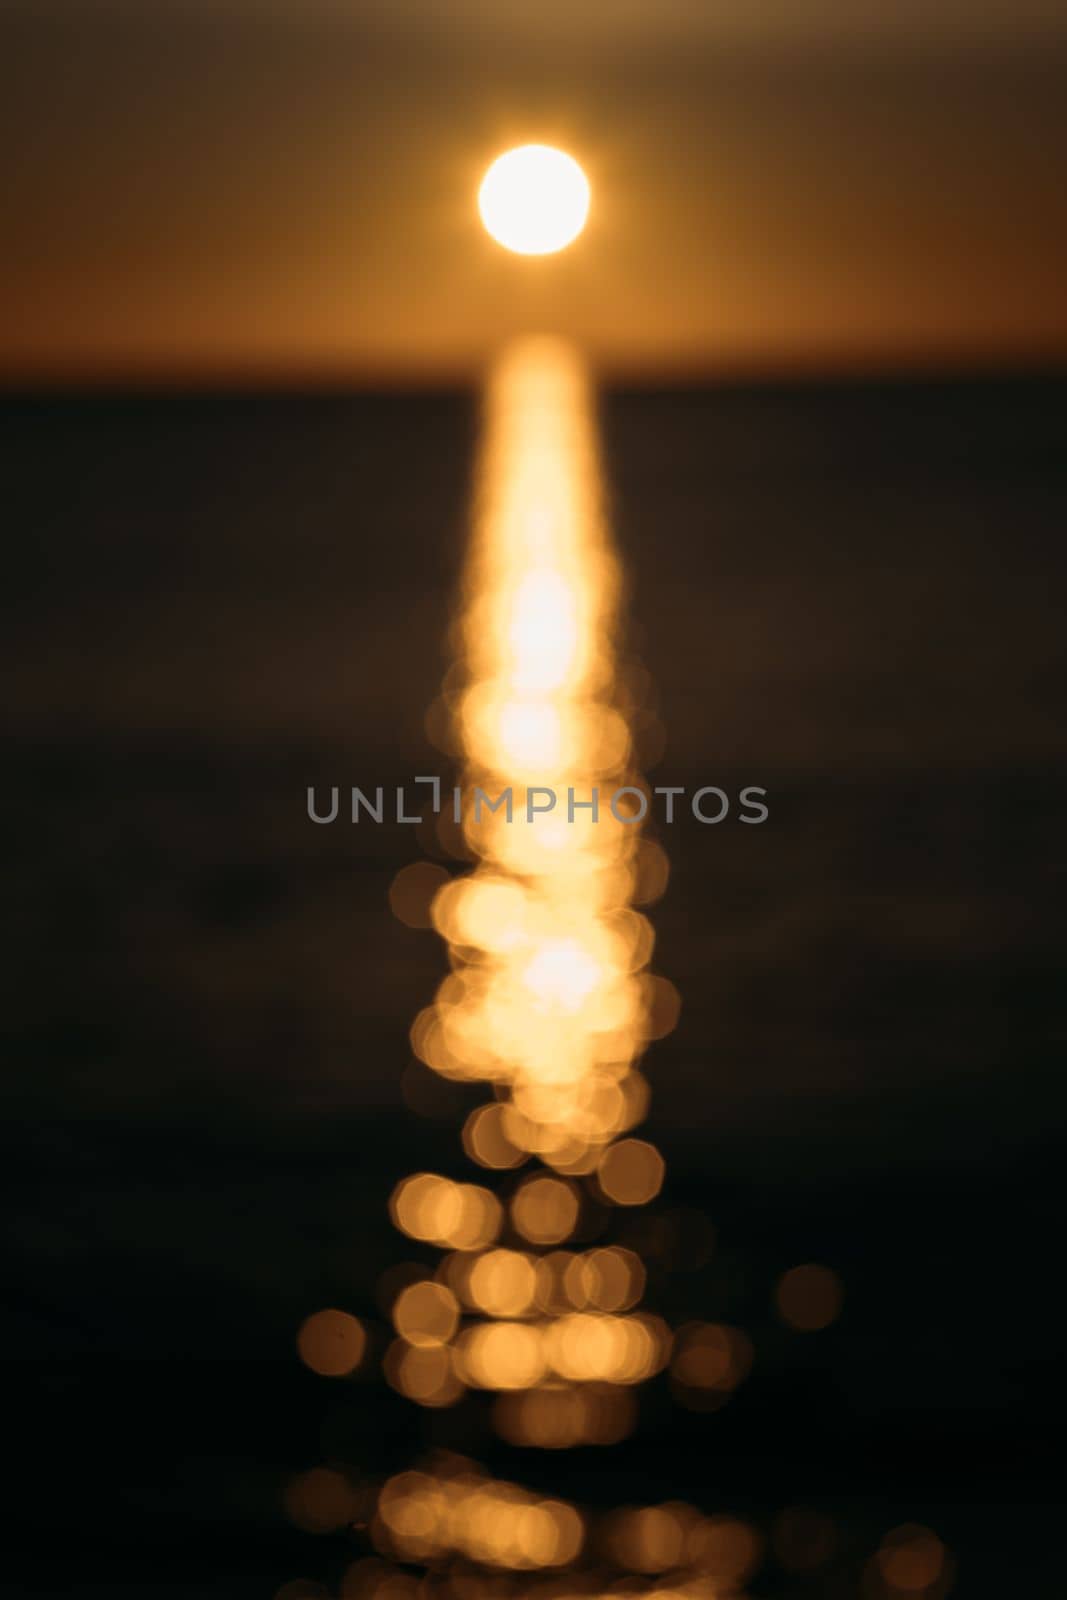 On a blurry abstract blurred sunset background, a bright yellow sun disk casts glare on the sea water. Gorgeous golden blurred sunset background in the coming dusk of the tropics